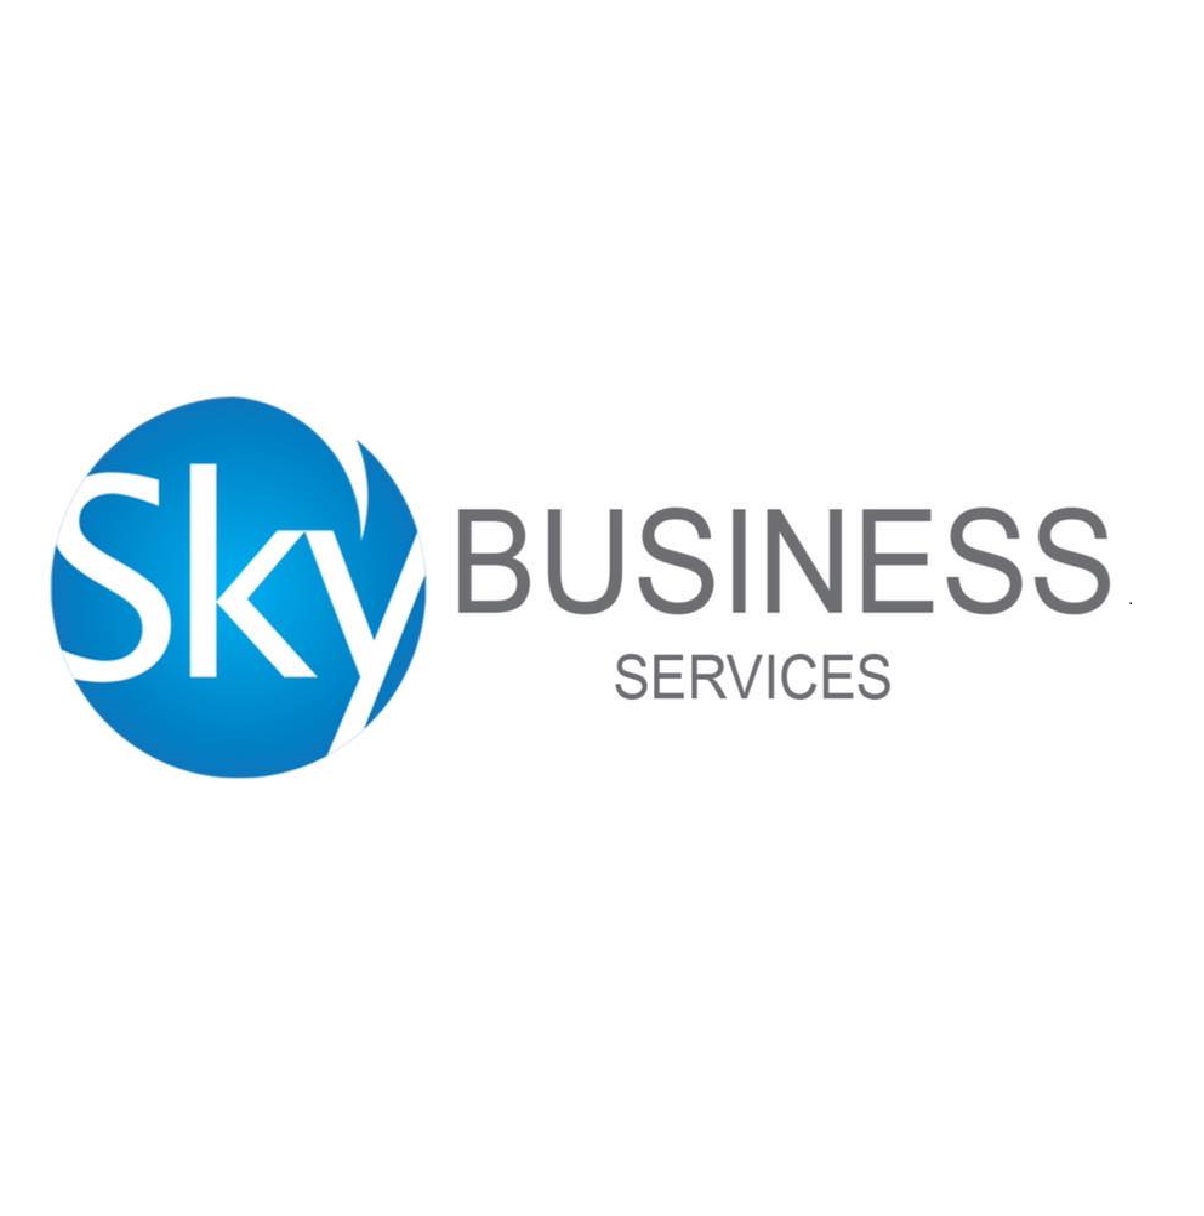 Sky Business Services